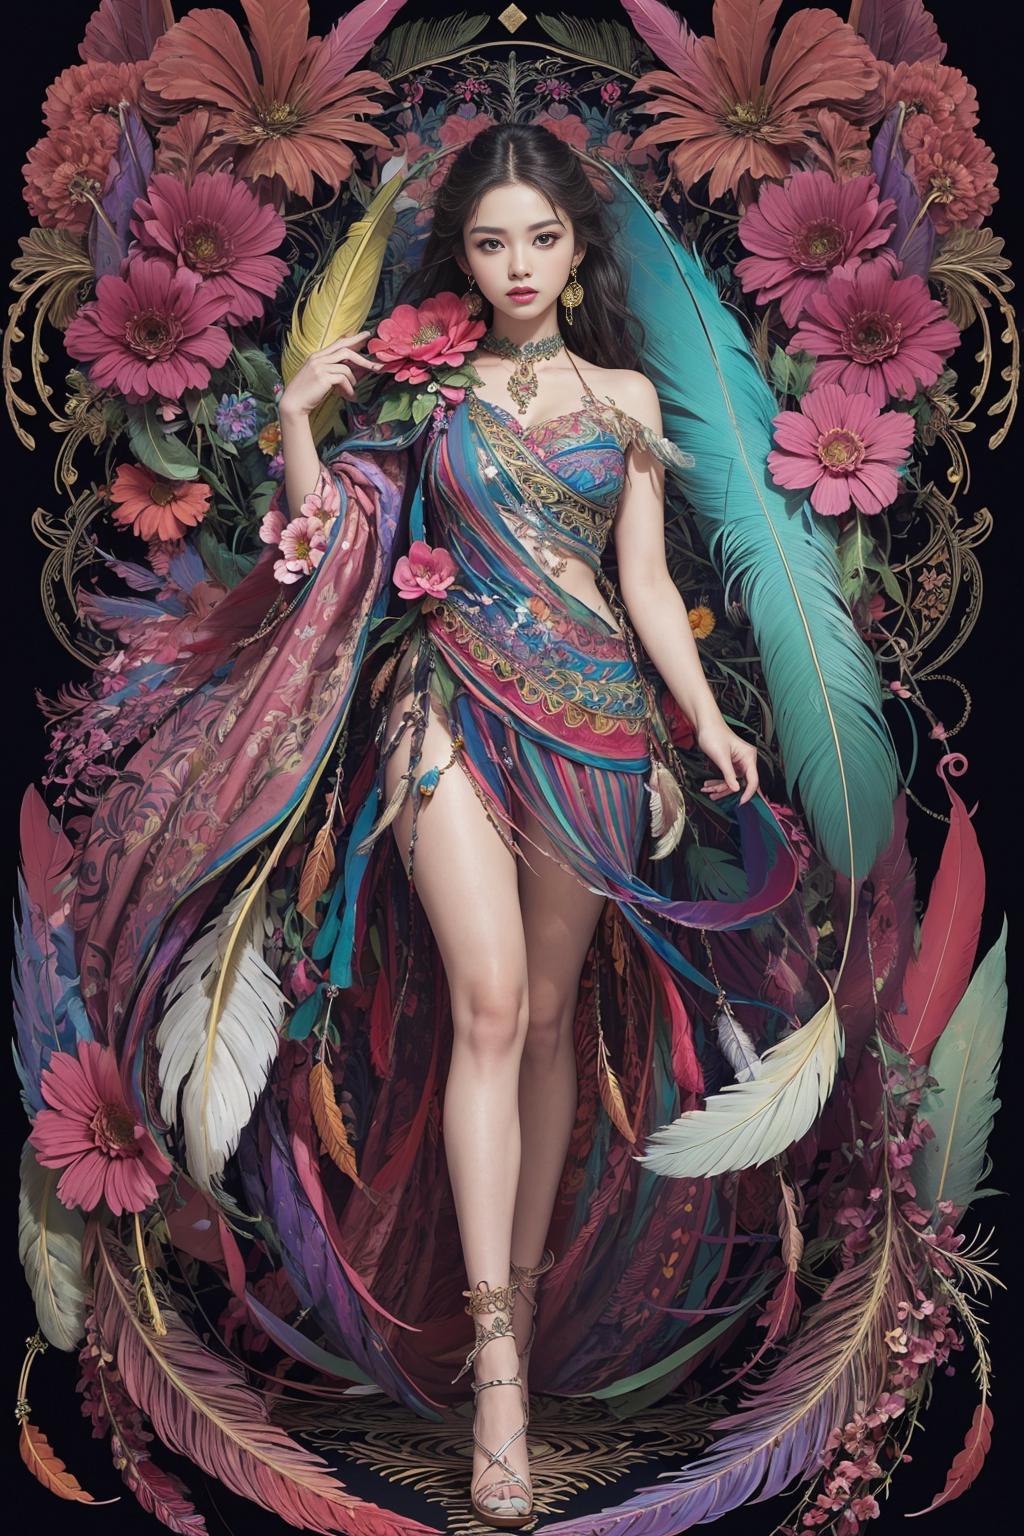 A beautiful woman wearing a colorful dress and holding a feather.